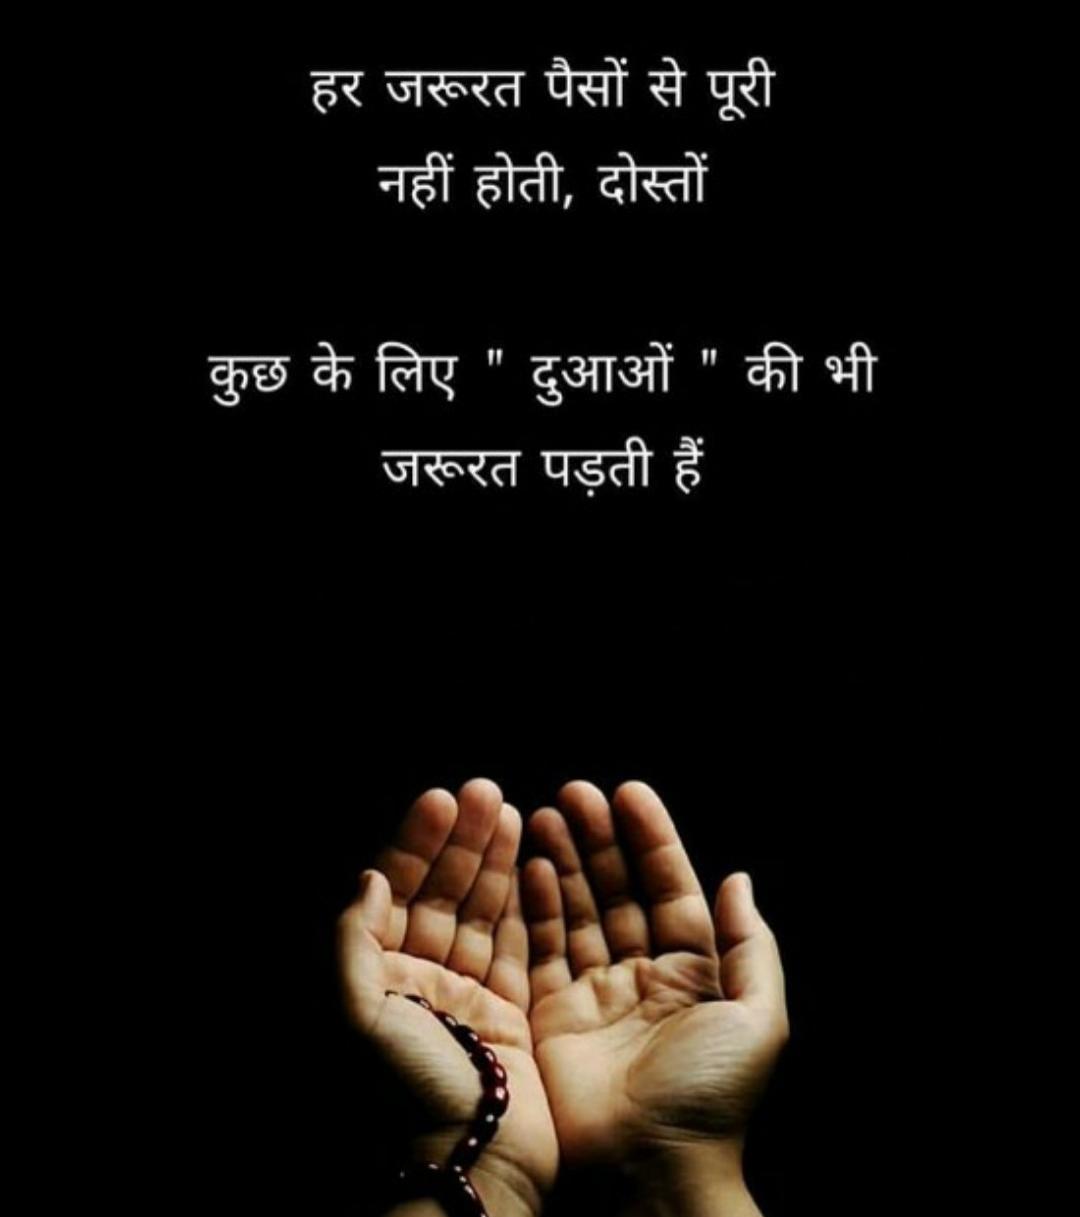 inspirational-life-quotes-in-hindi-14.jpg